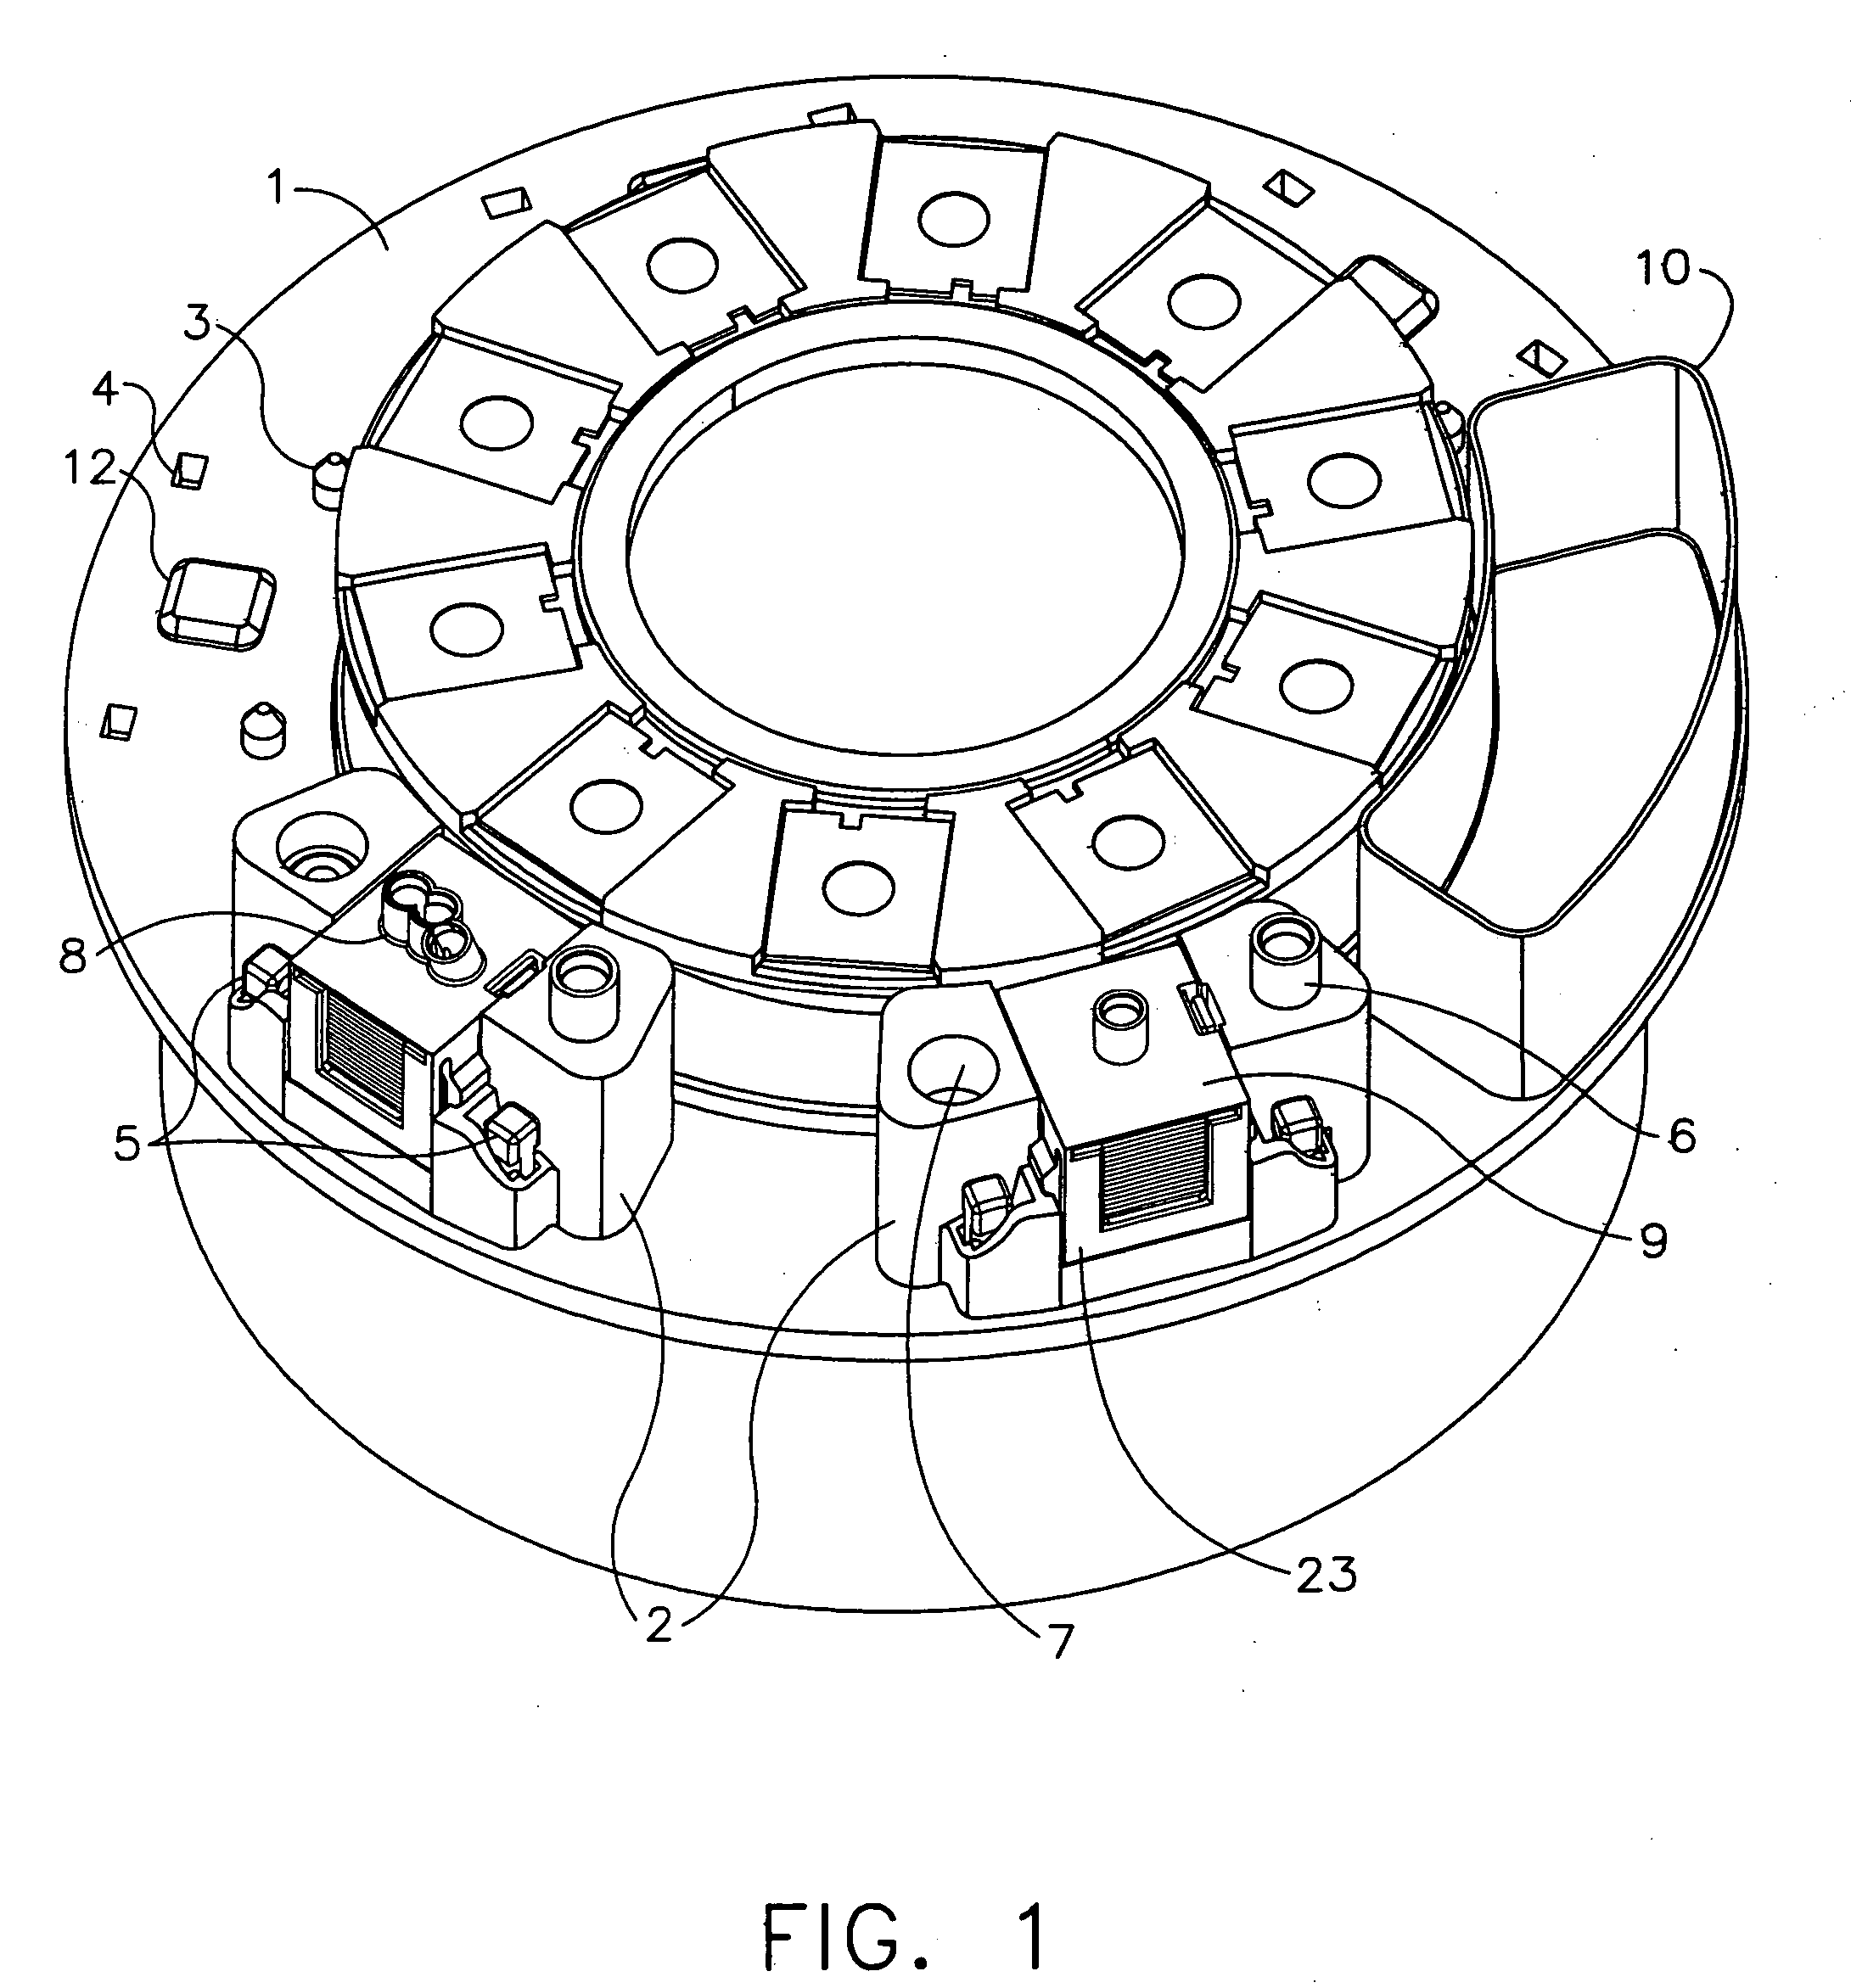 Analyzer having removable holders or a centrifuge